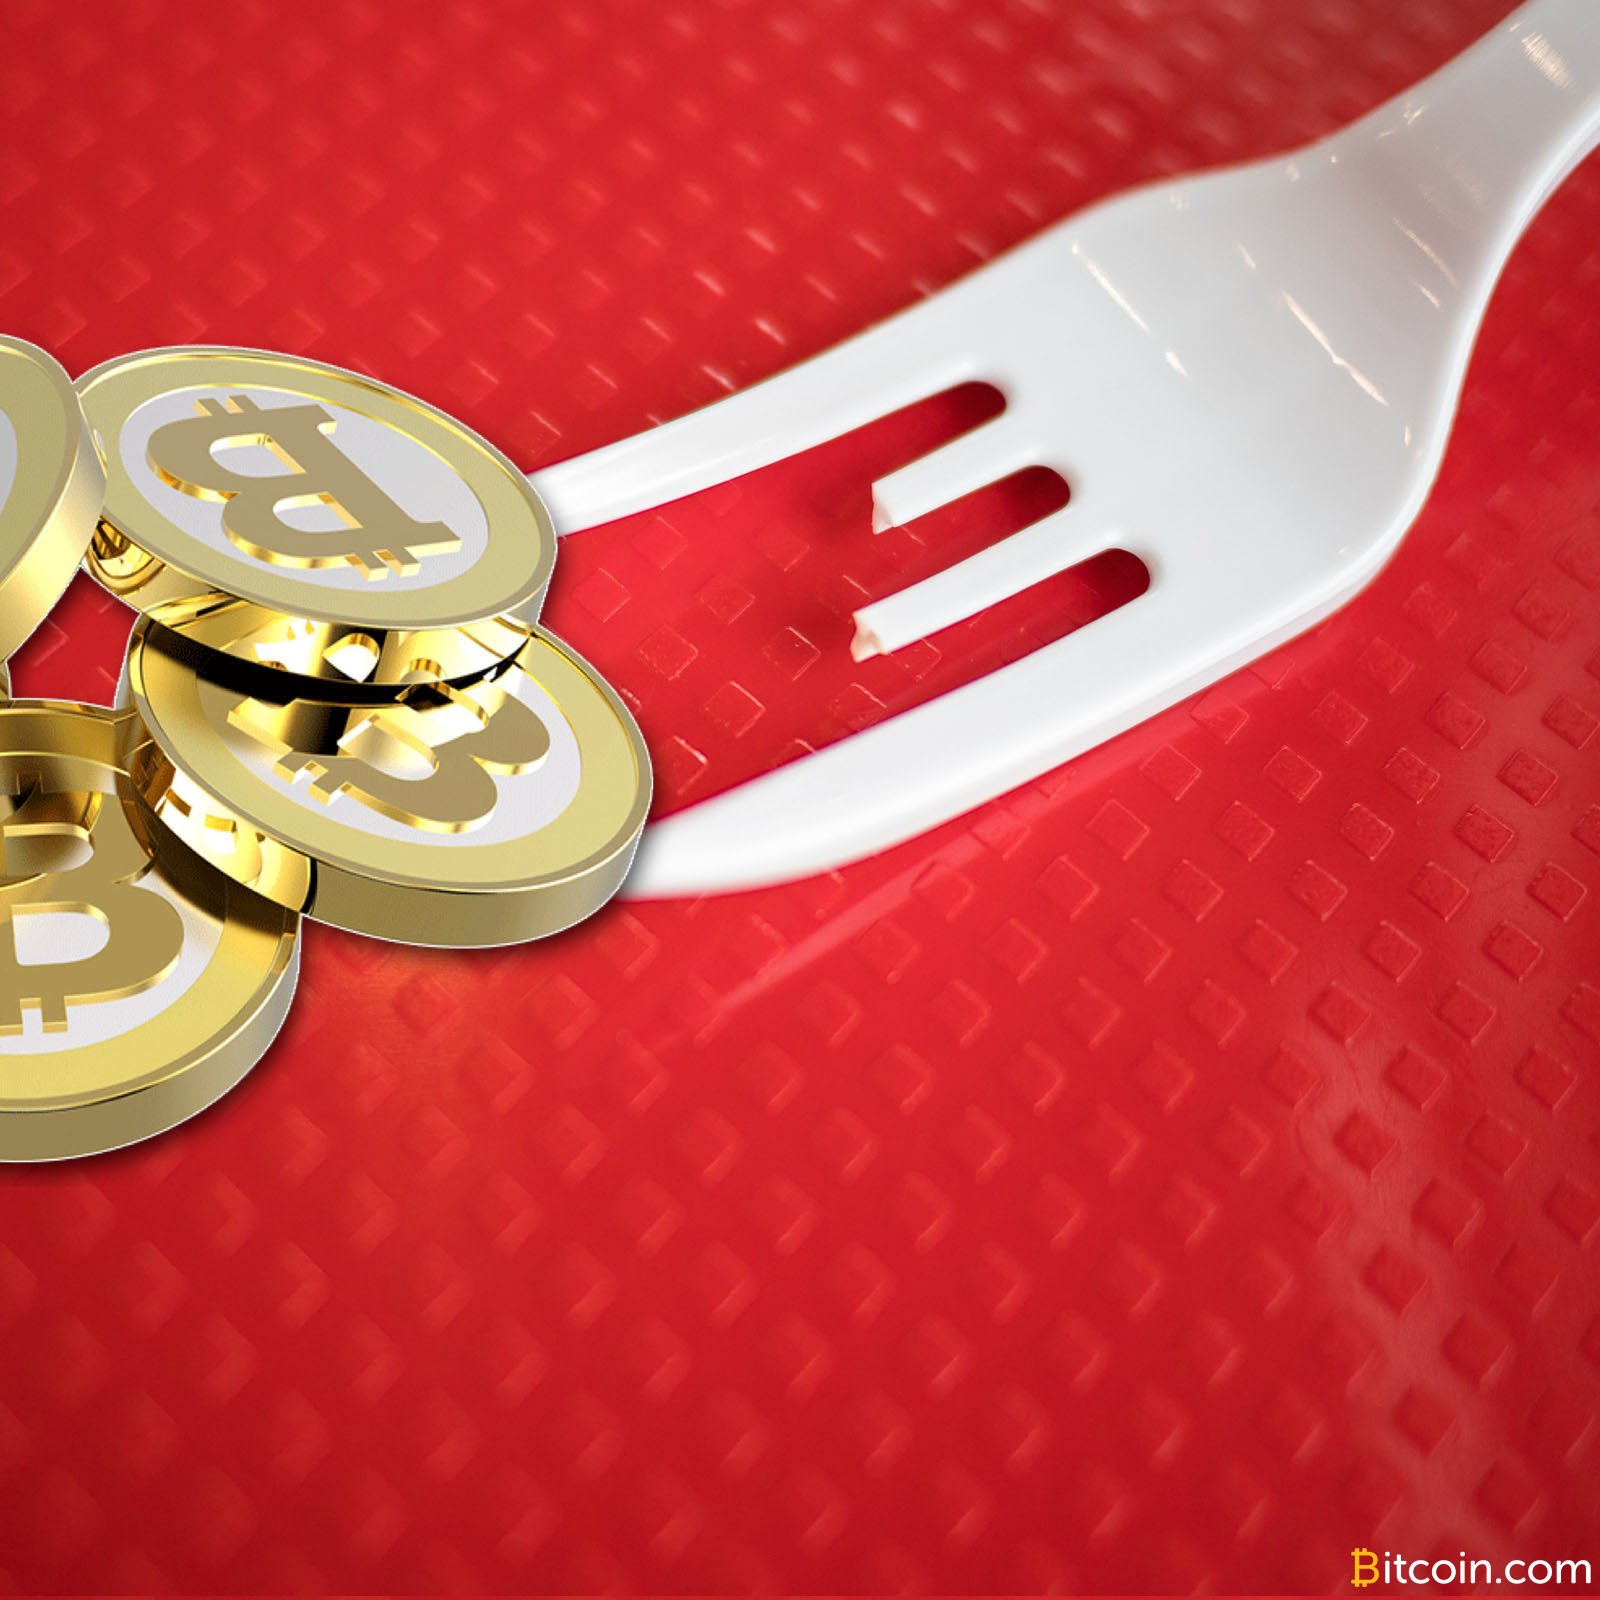 This Week in Bitcoin: Failed Forks, Atomic Swaps, and a Little Trouble in Big China